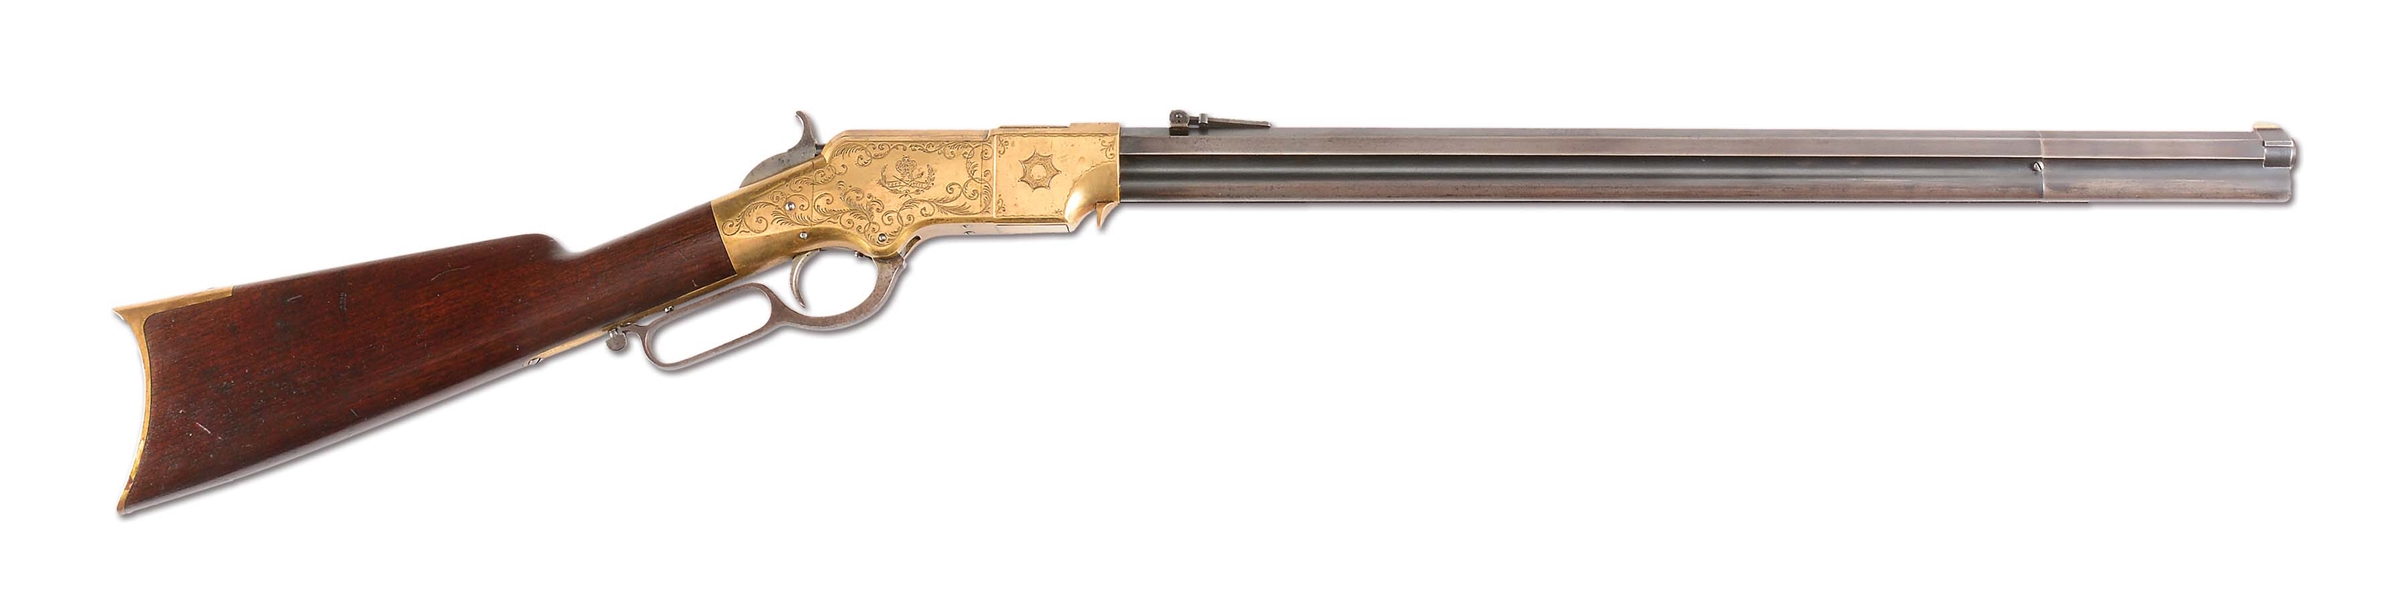 (A) SUPERB MARTIAL 1860 HENRY RIFLE IDENTIFIED AND ENGRAVED TO CIVIL WAR VETERAN. 